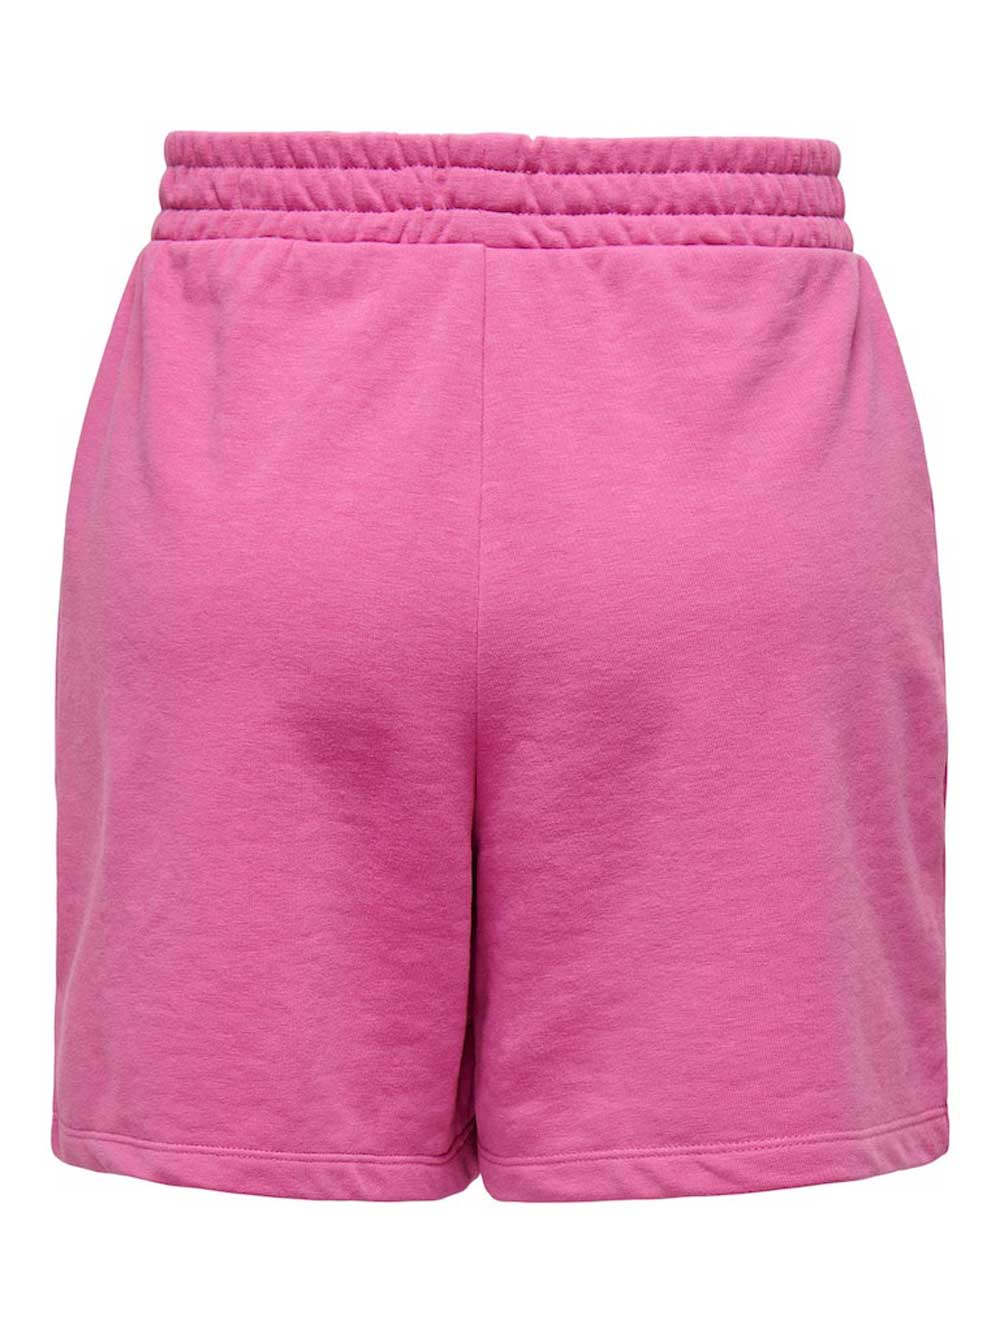 ONLY Shorts ONLY da DONNA - rosa